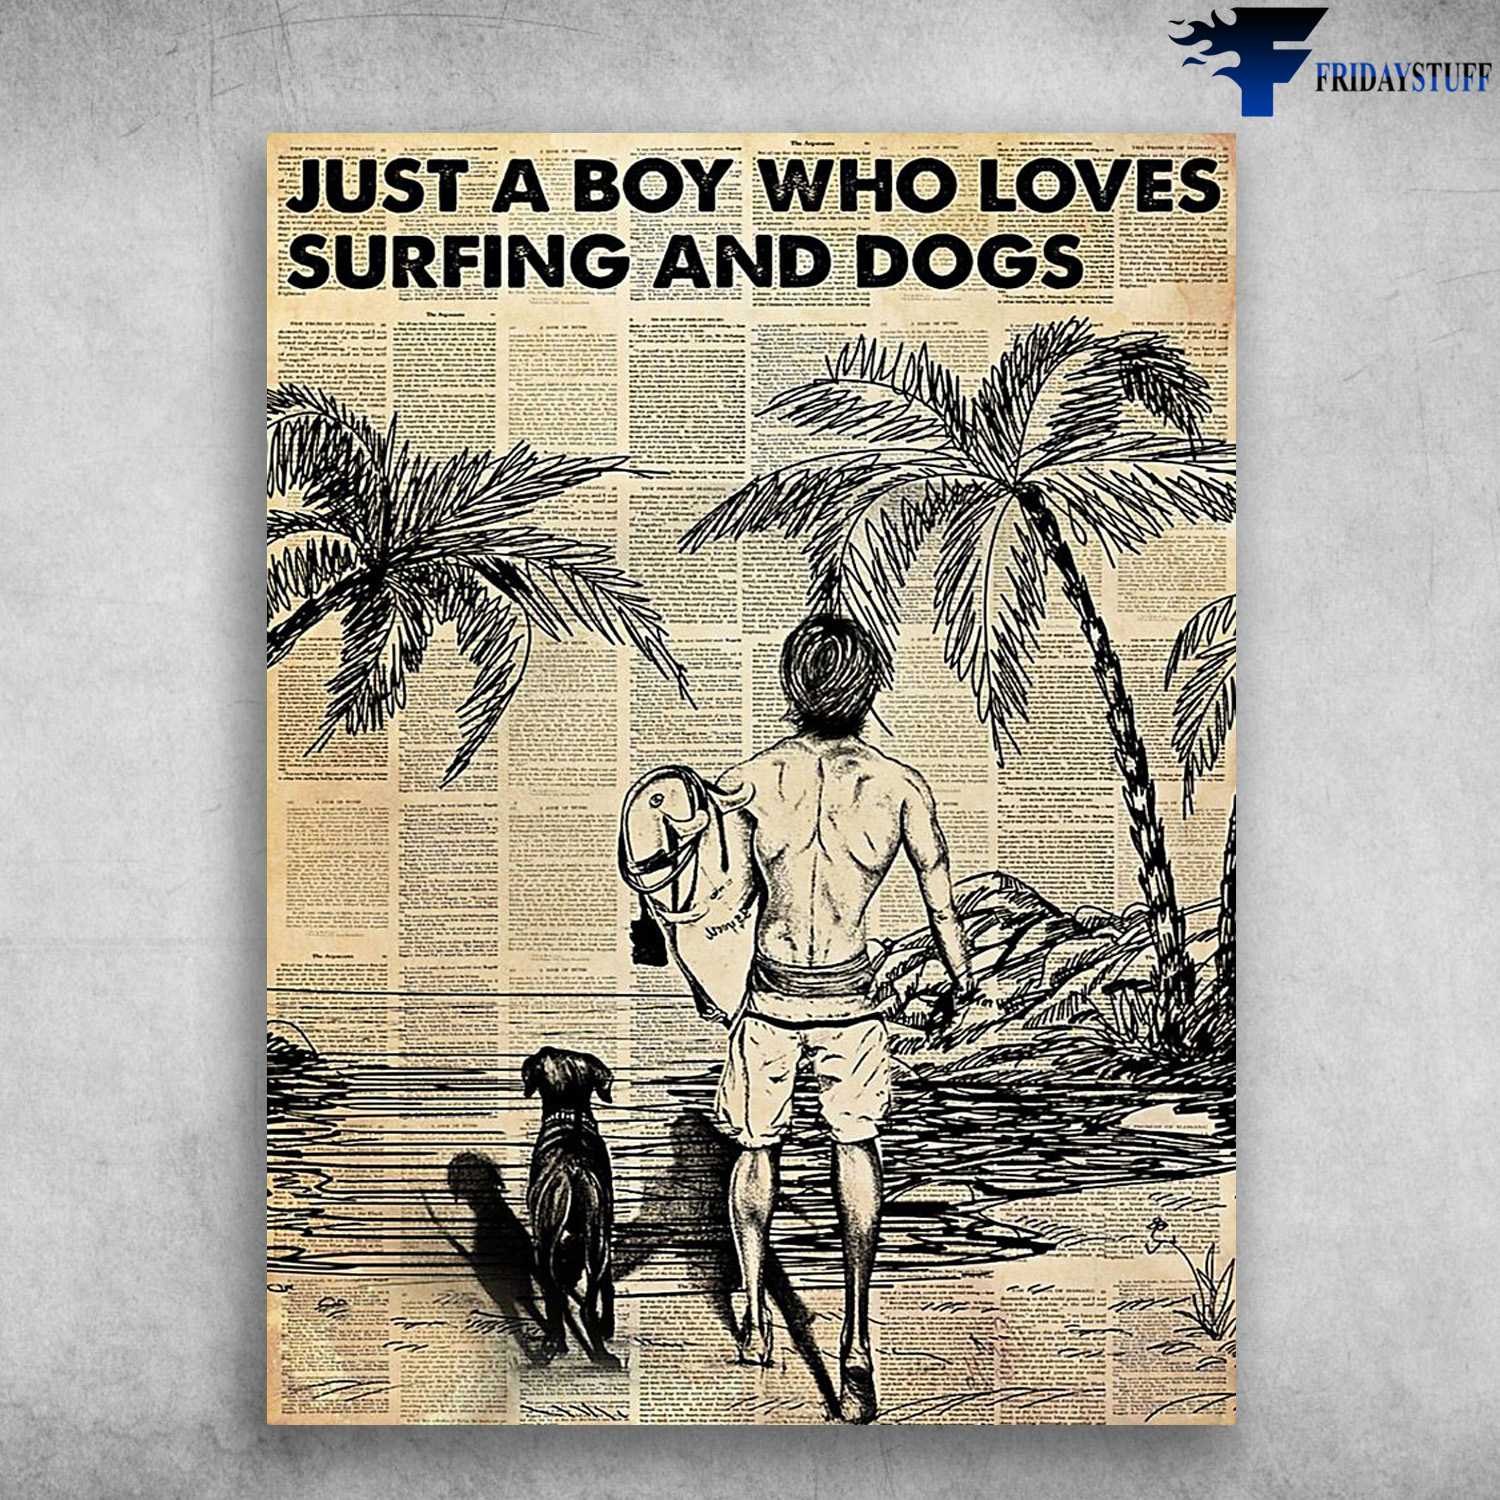 Surfing With Dog, Beach Poster - Just A Boy, Who Loves Surfing And Dogs